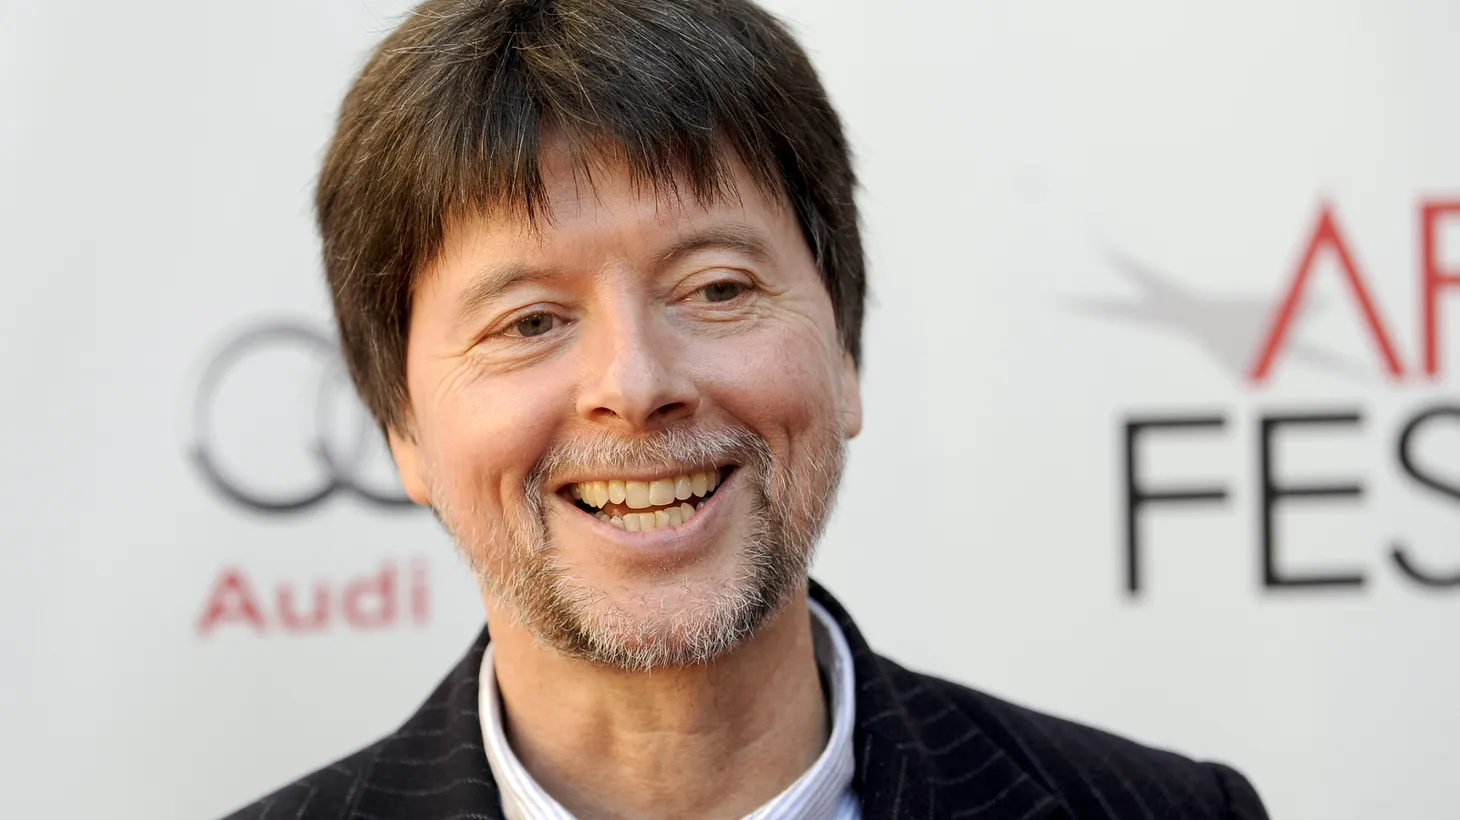 Director Ken Burns arrives at the Hollywood screening of his movie "The Central Park Five" during AFI FEST in Los Angeles on November 3, 2012.